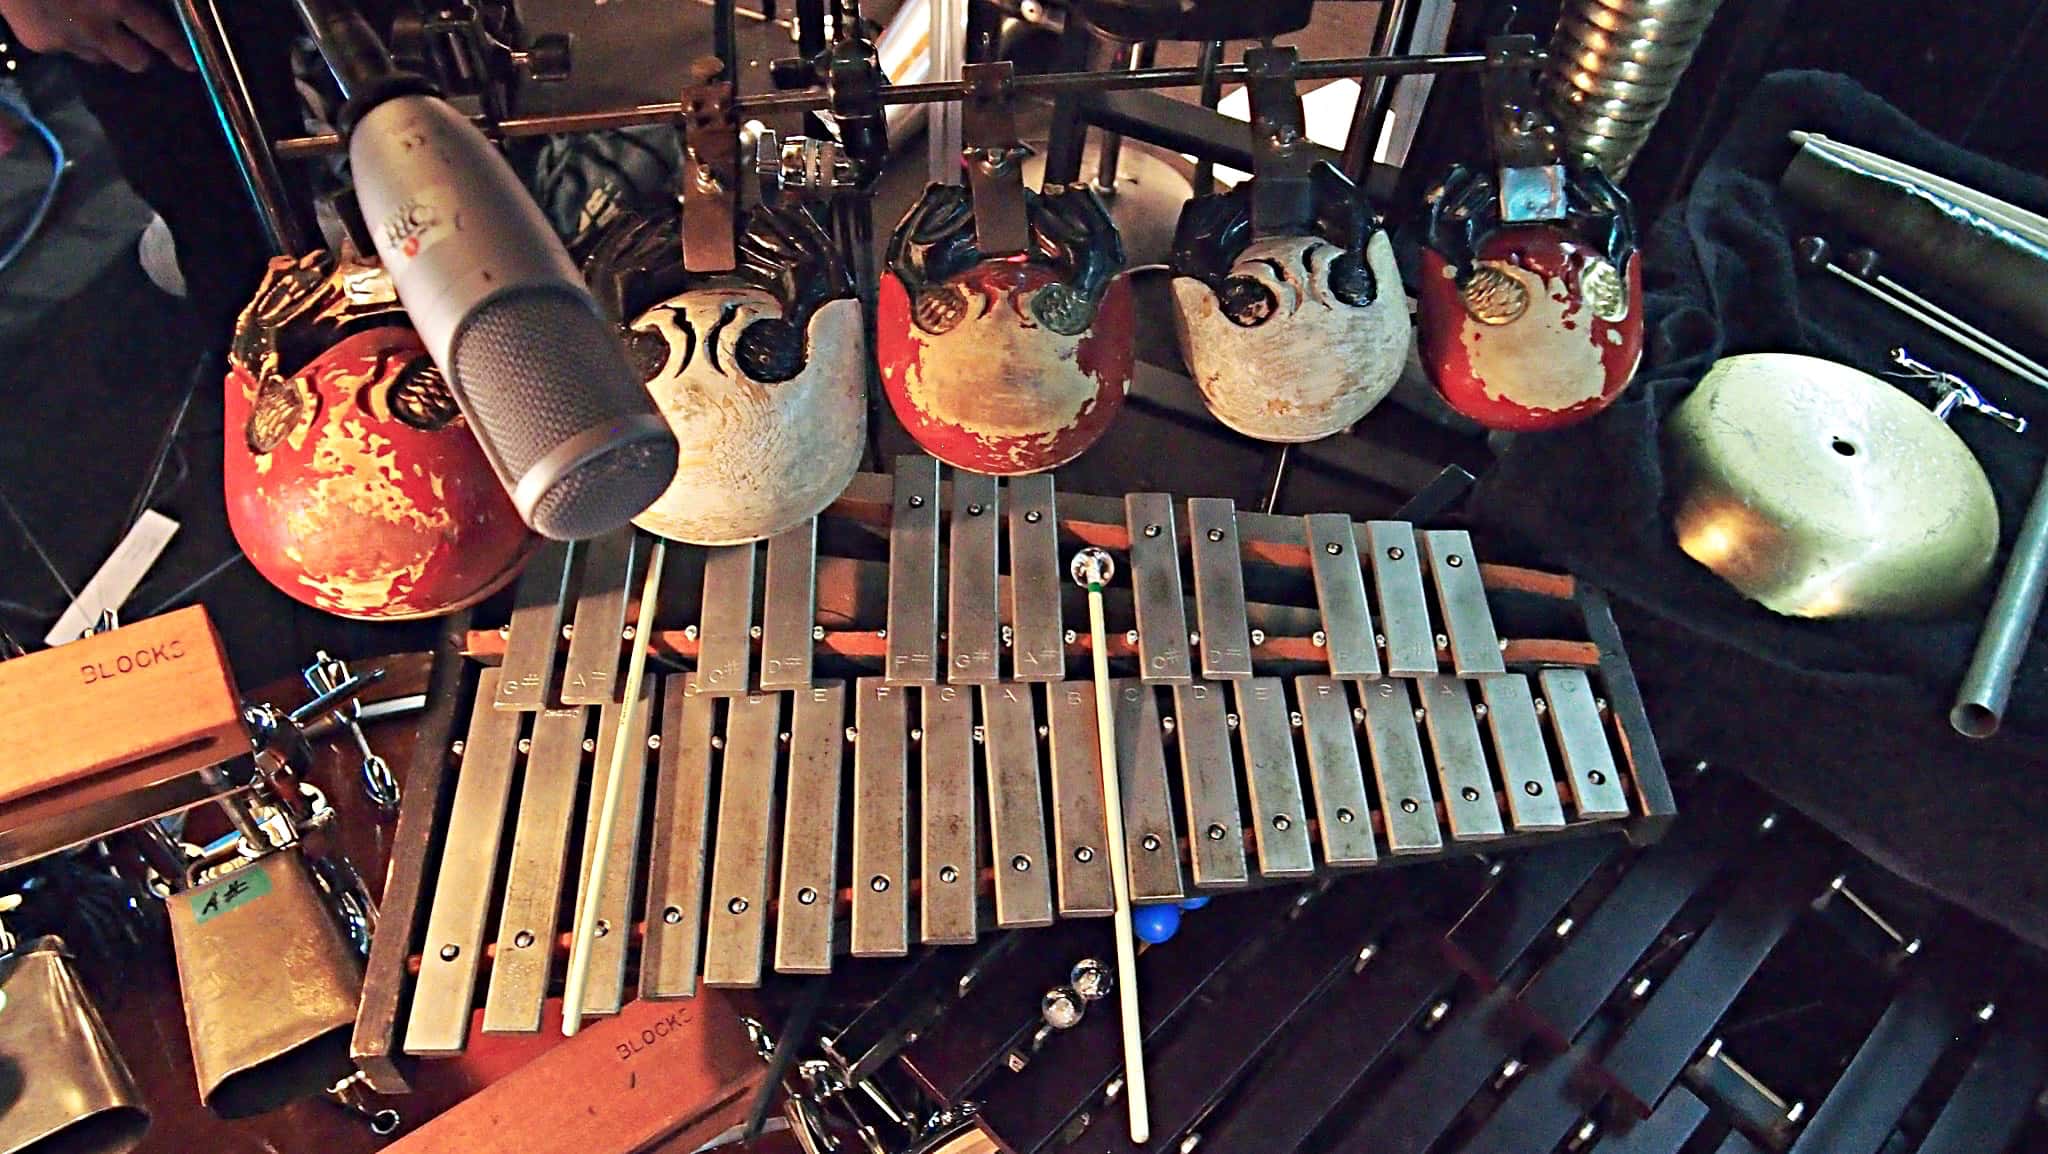 Paul Hansen’s setup for Ragtime at the 5th Avenue Theatre in Seattle, Washington.